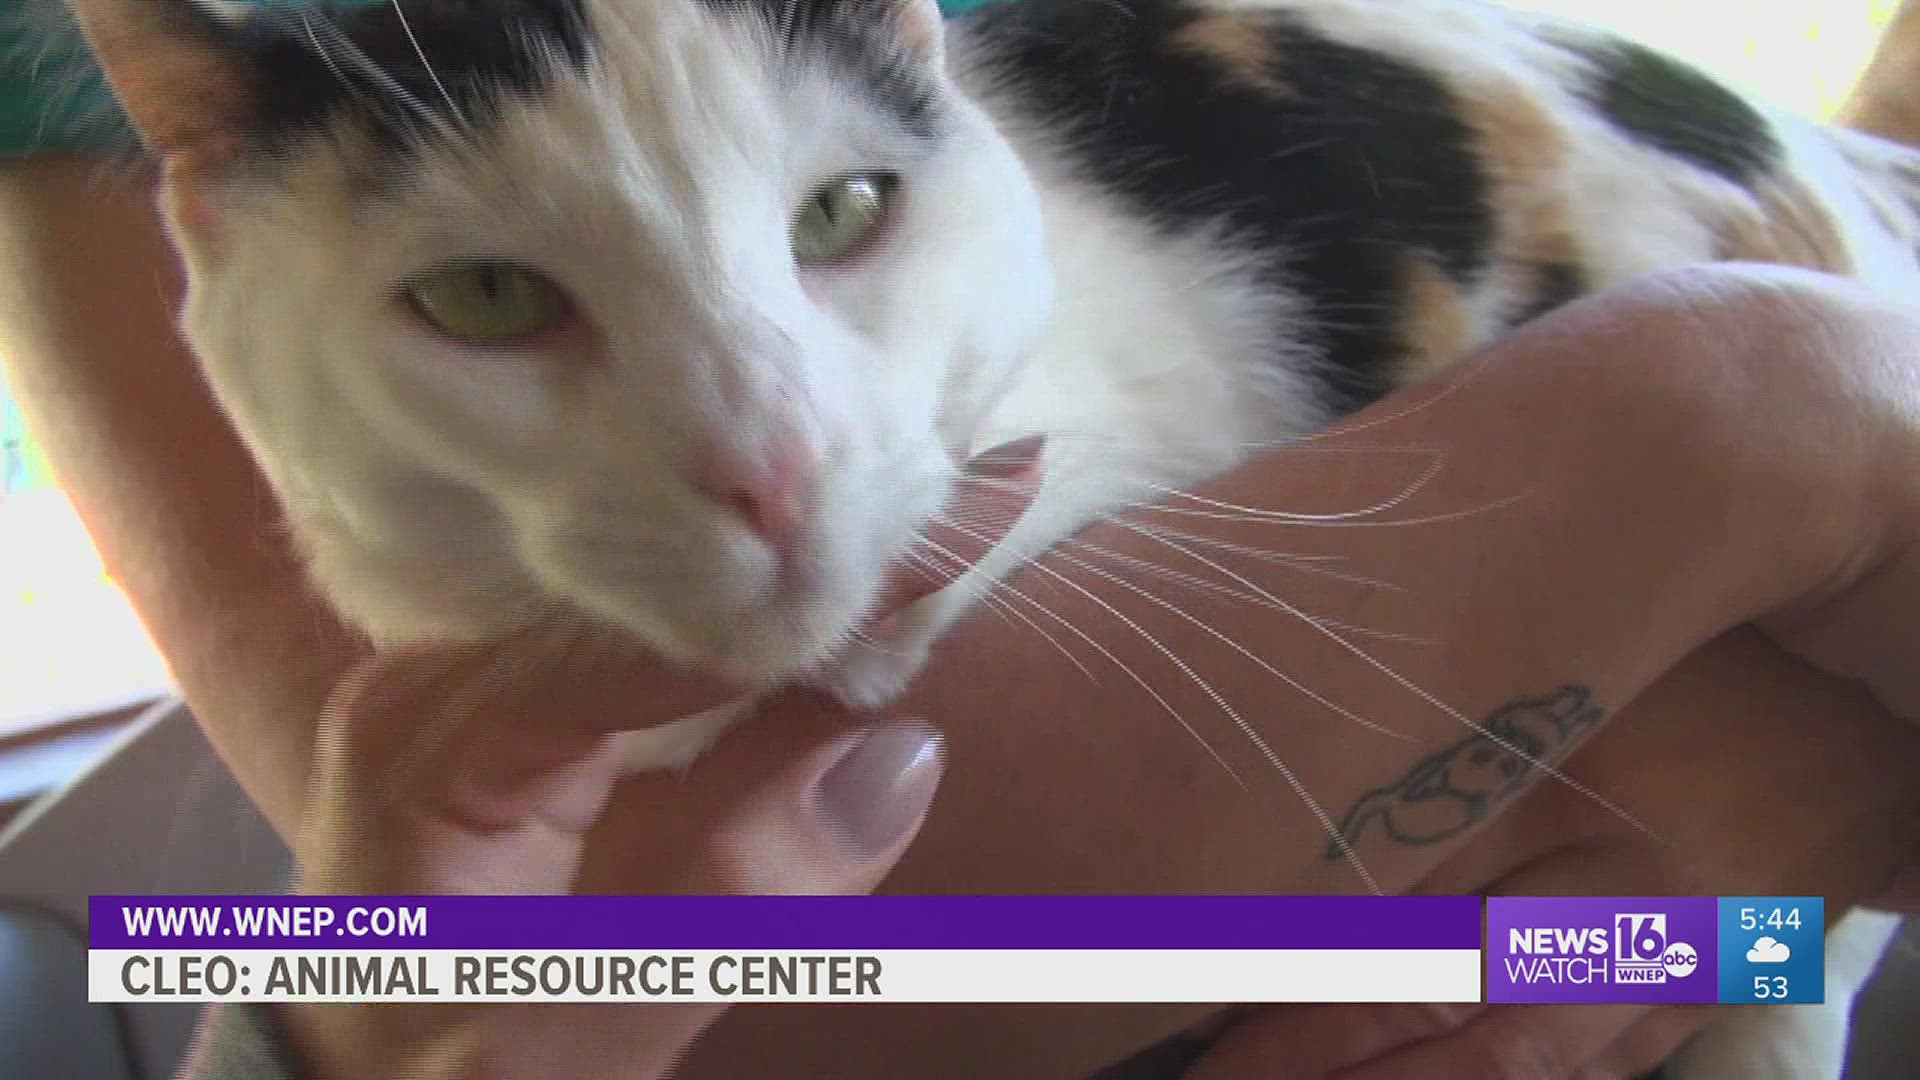 In this week's 16 To The Rescue, we meet a 1-and-a half-year-old cat named Cleo who is looking for a home to live in and a lap to lay on.